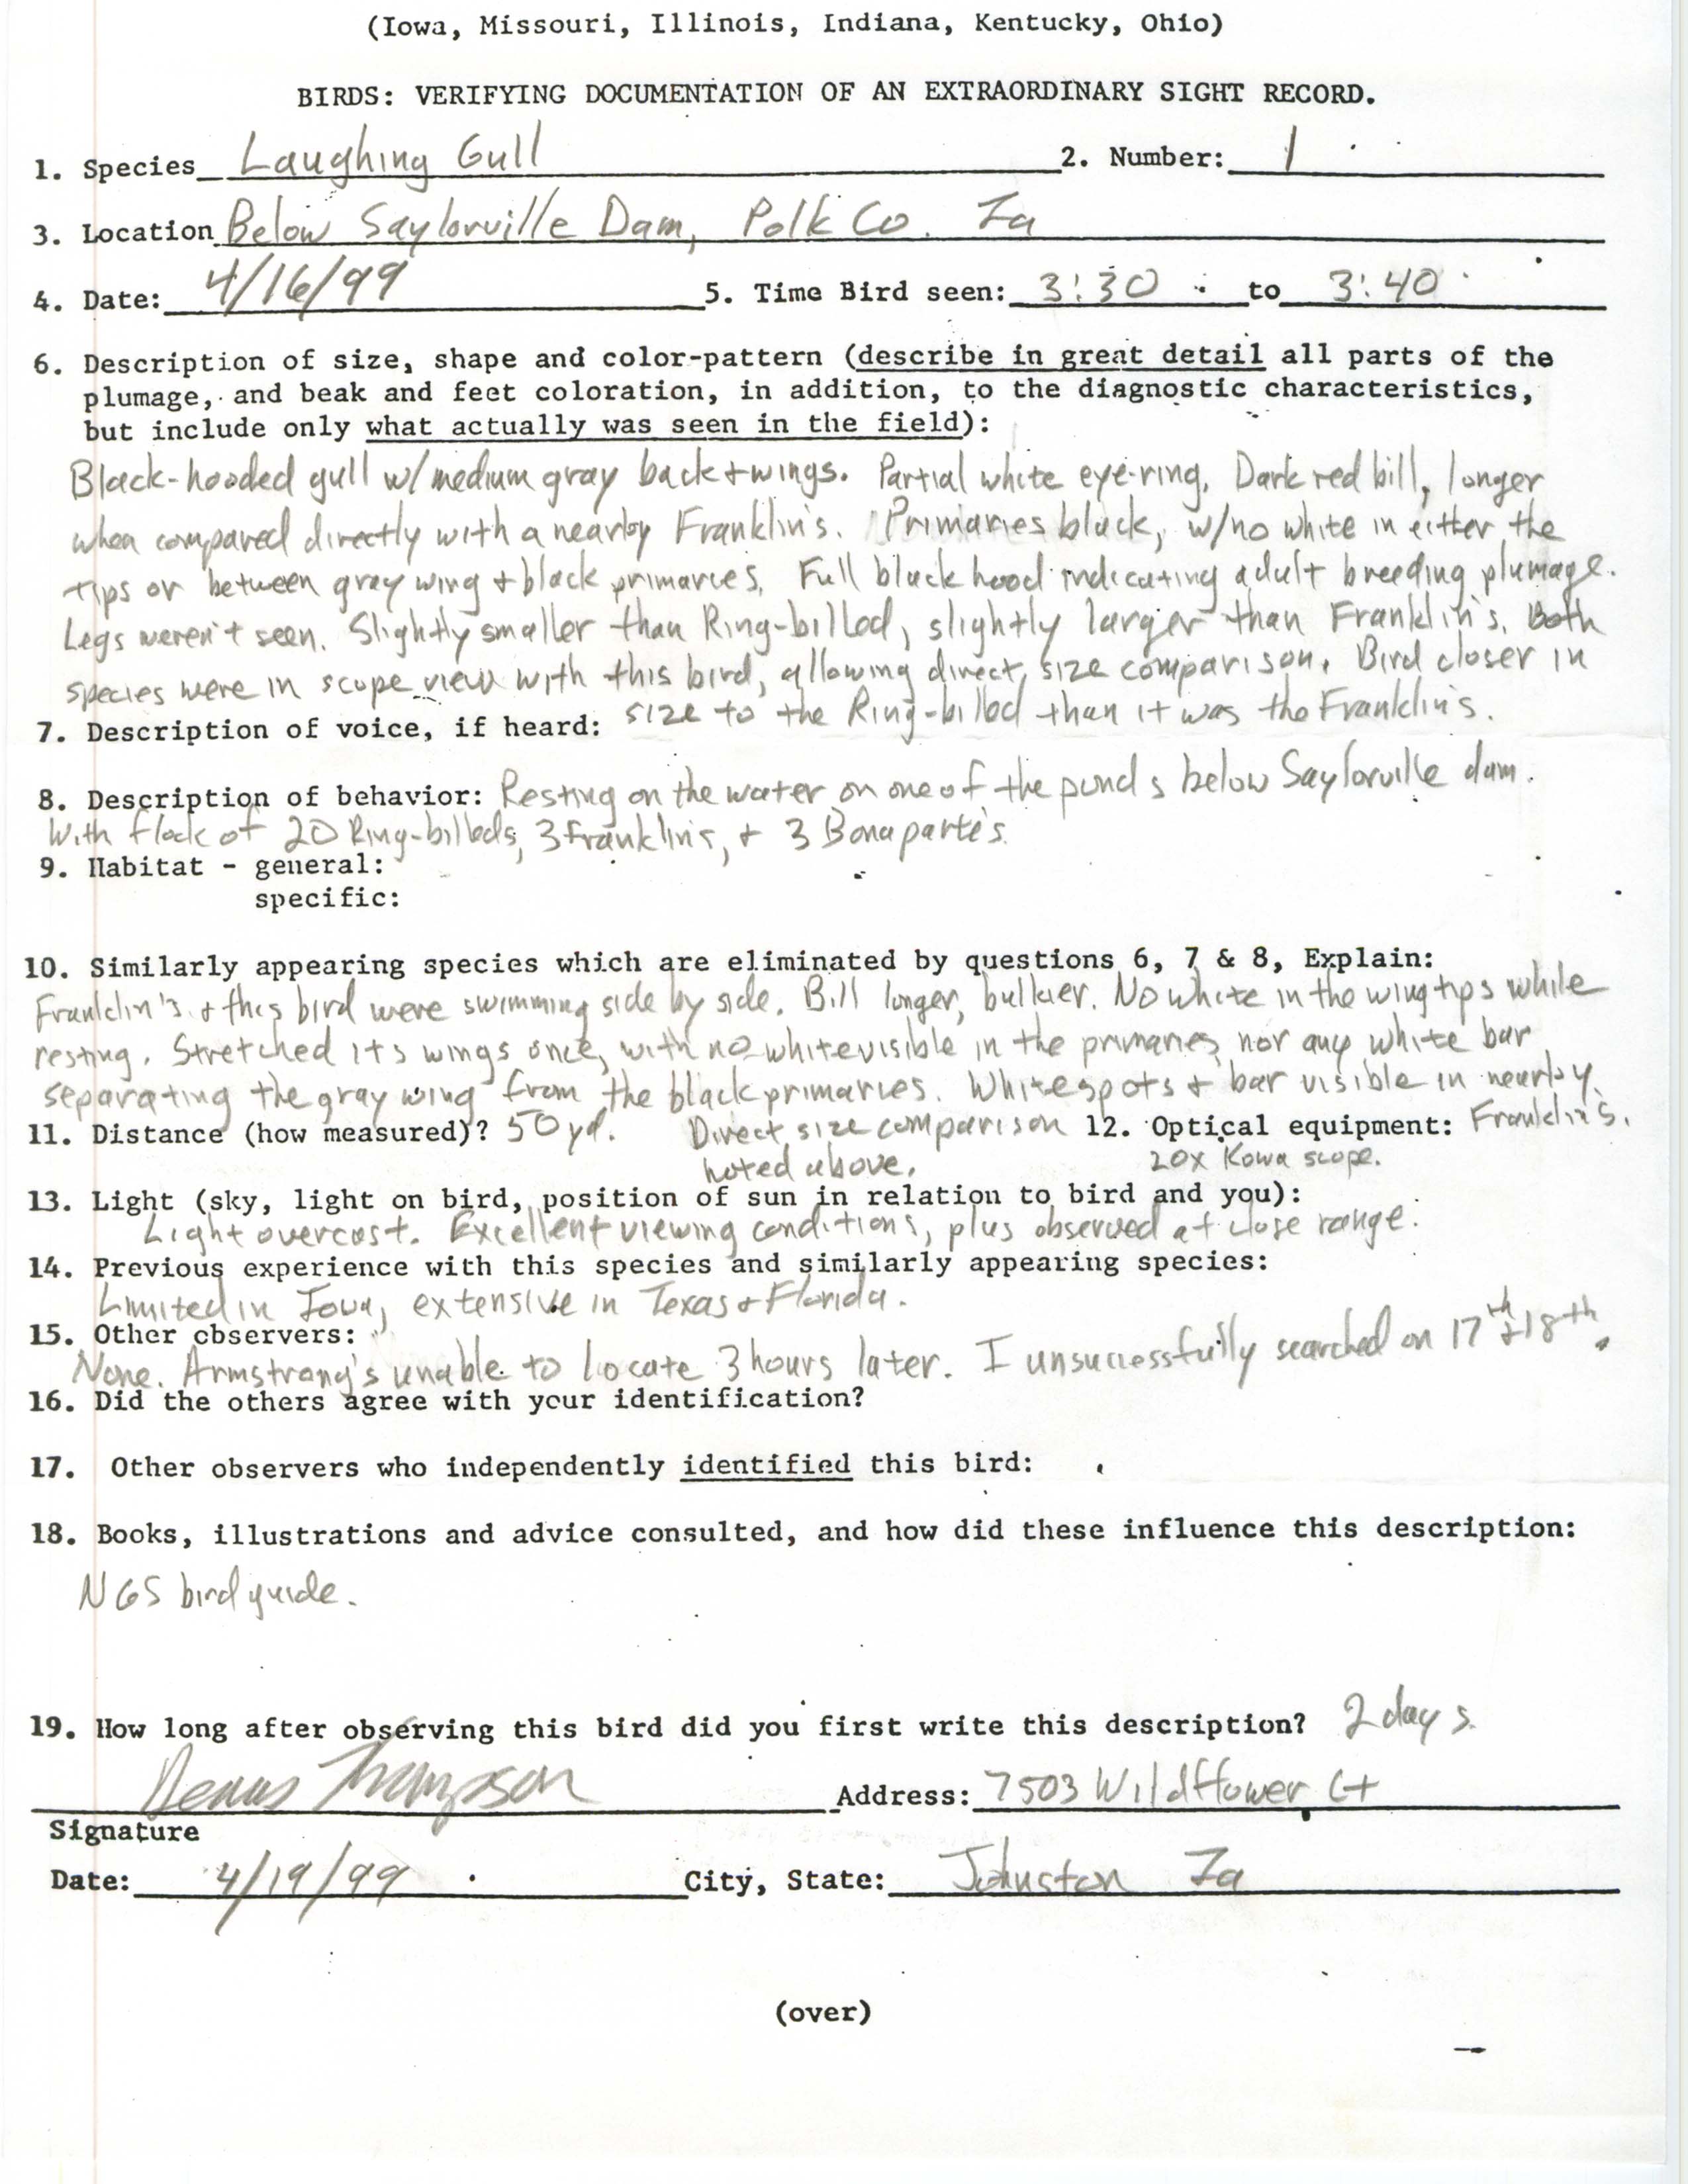 Rare bird documentation form for Laughing Gull at Saylorville Dam, 1999